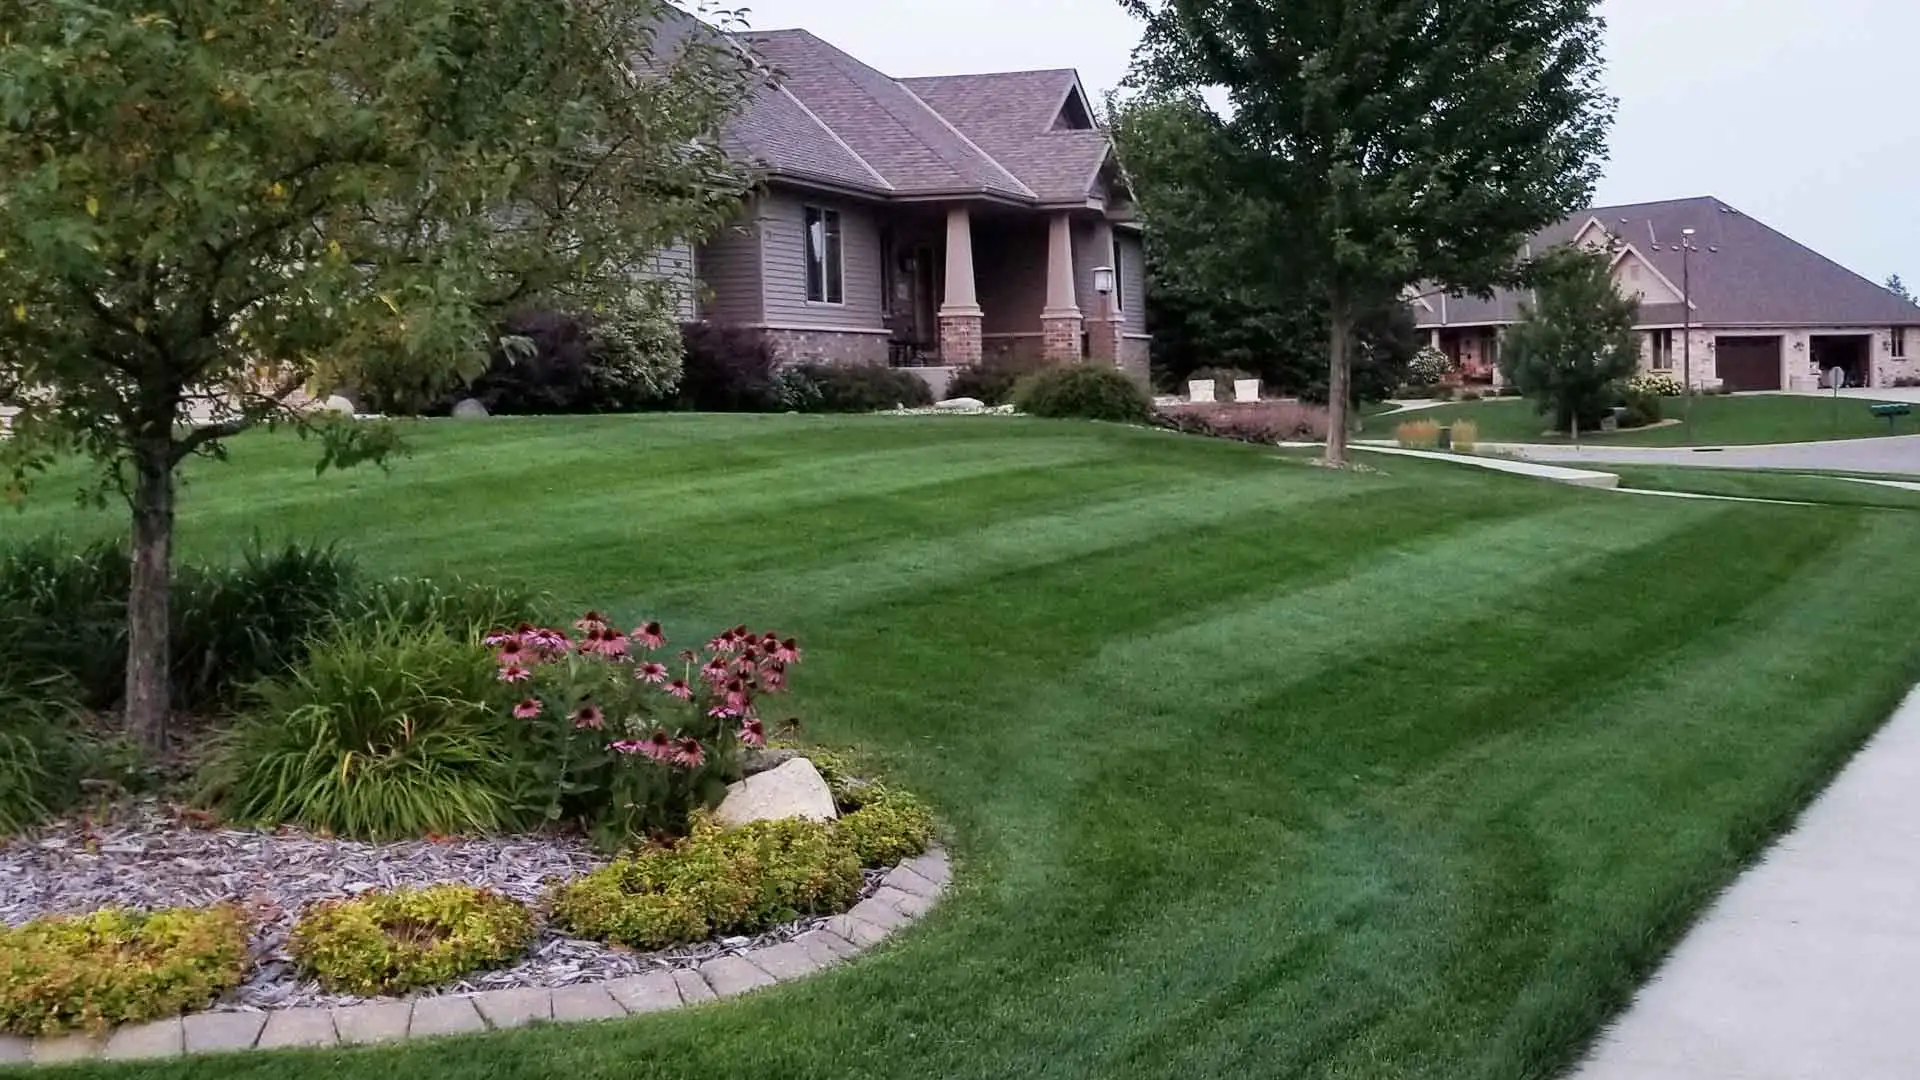 Well fertilized and weed controlled lawn in St. Cloud, MN.